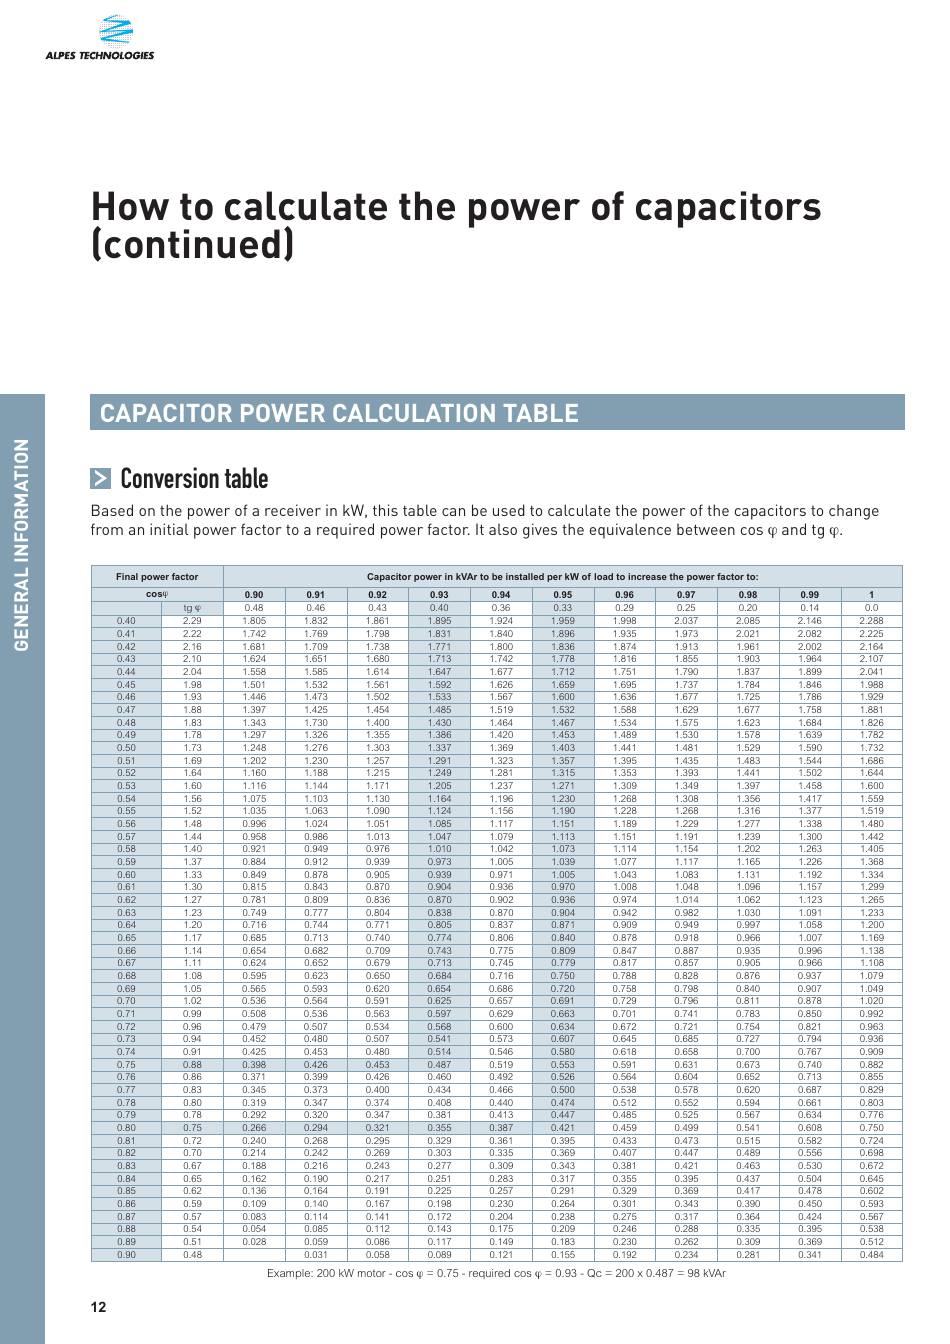 capacitor-power-conversion-chart-alpes-technologies-download-printable-pdf-templateroller